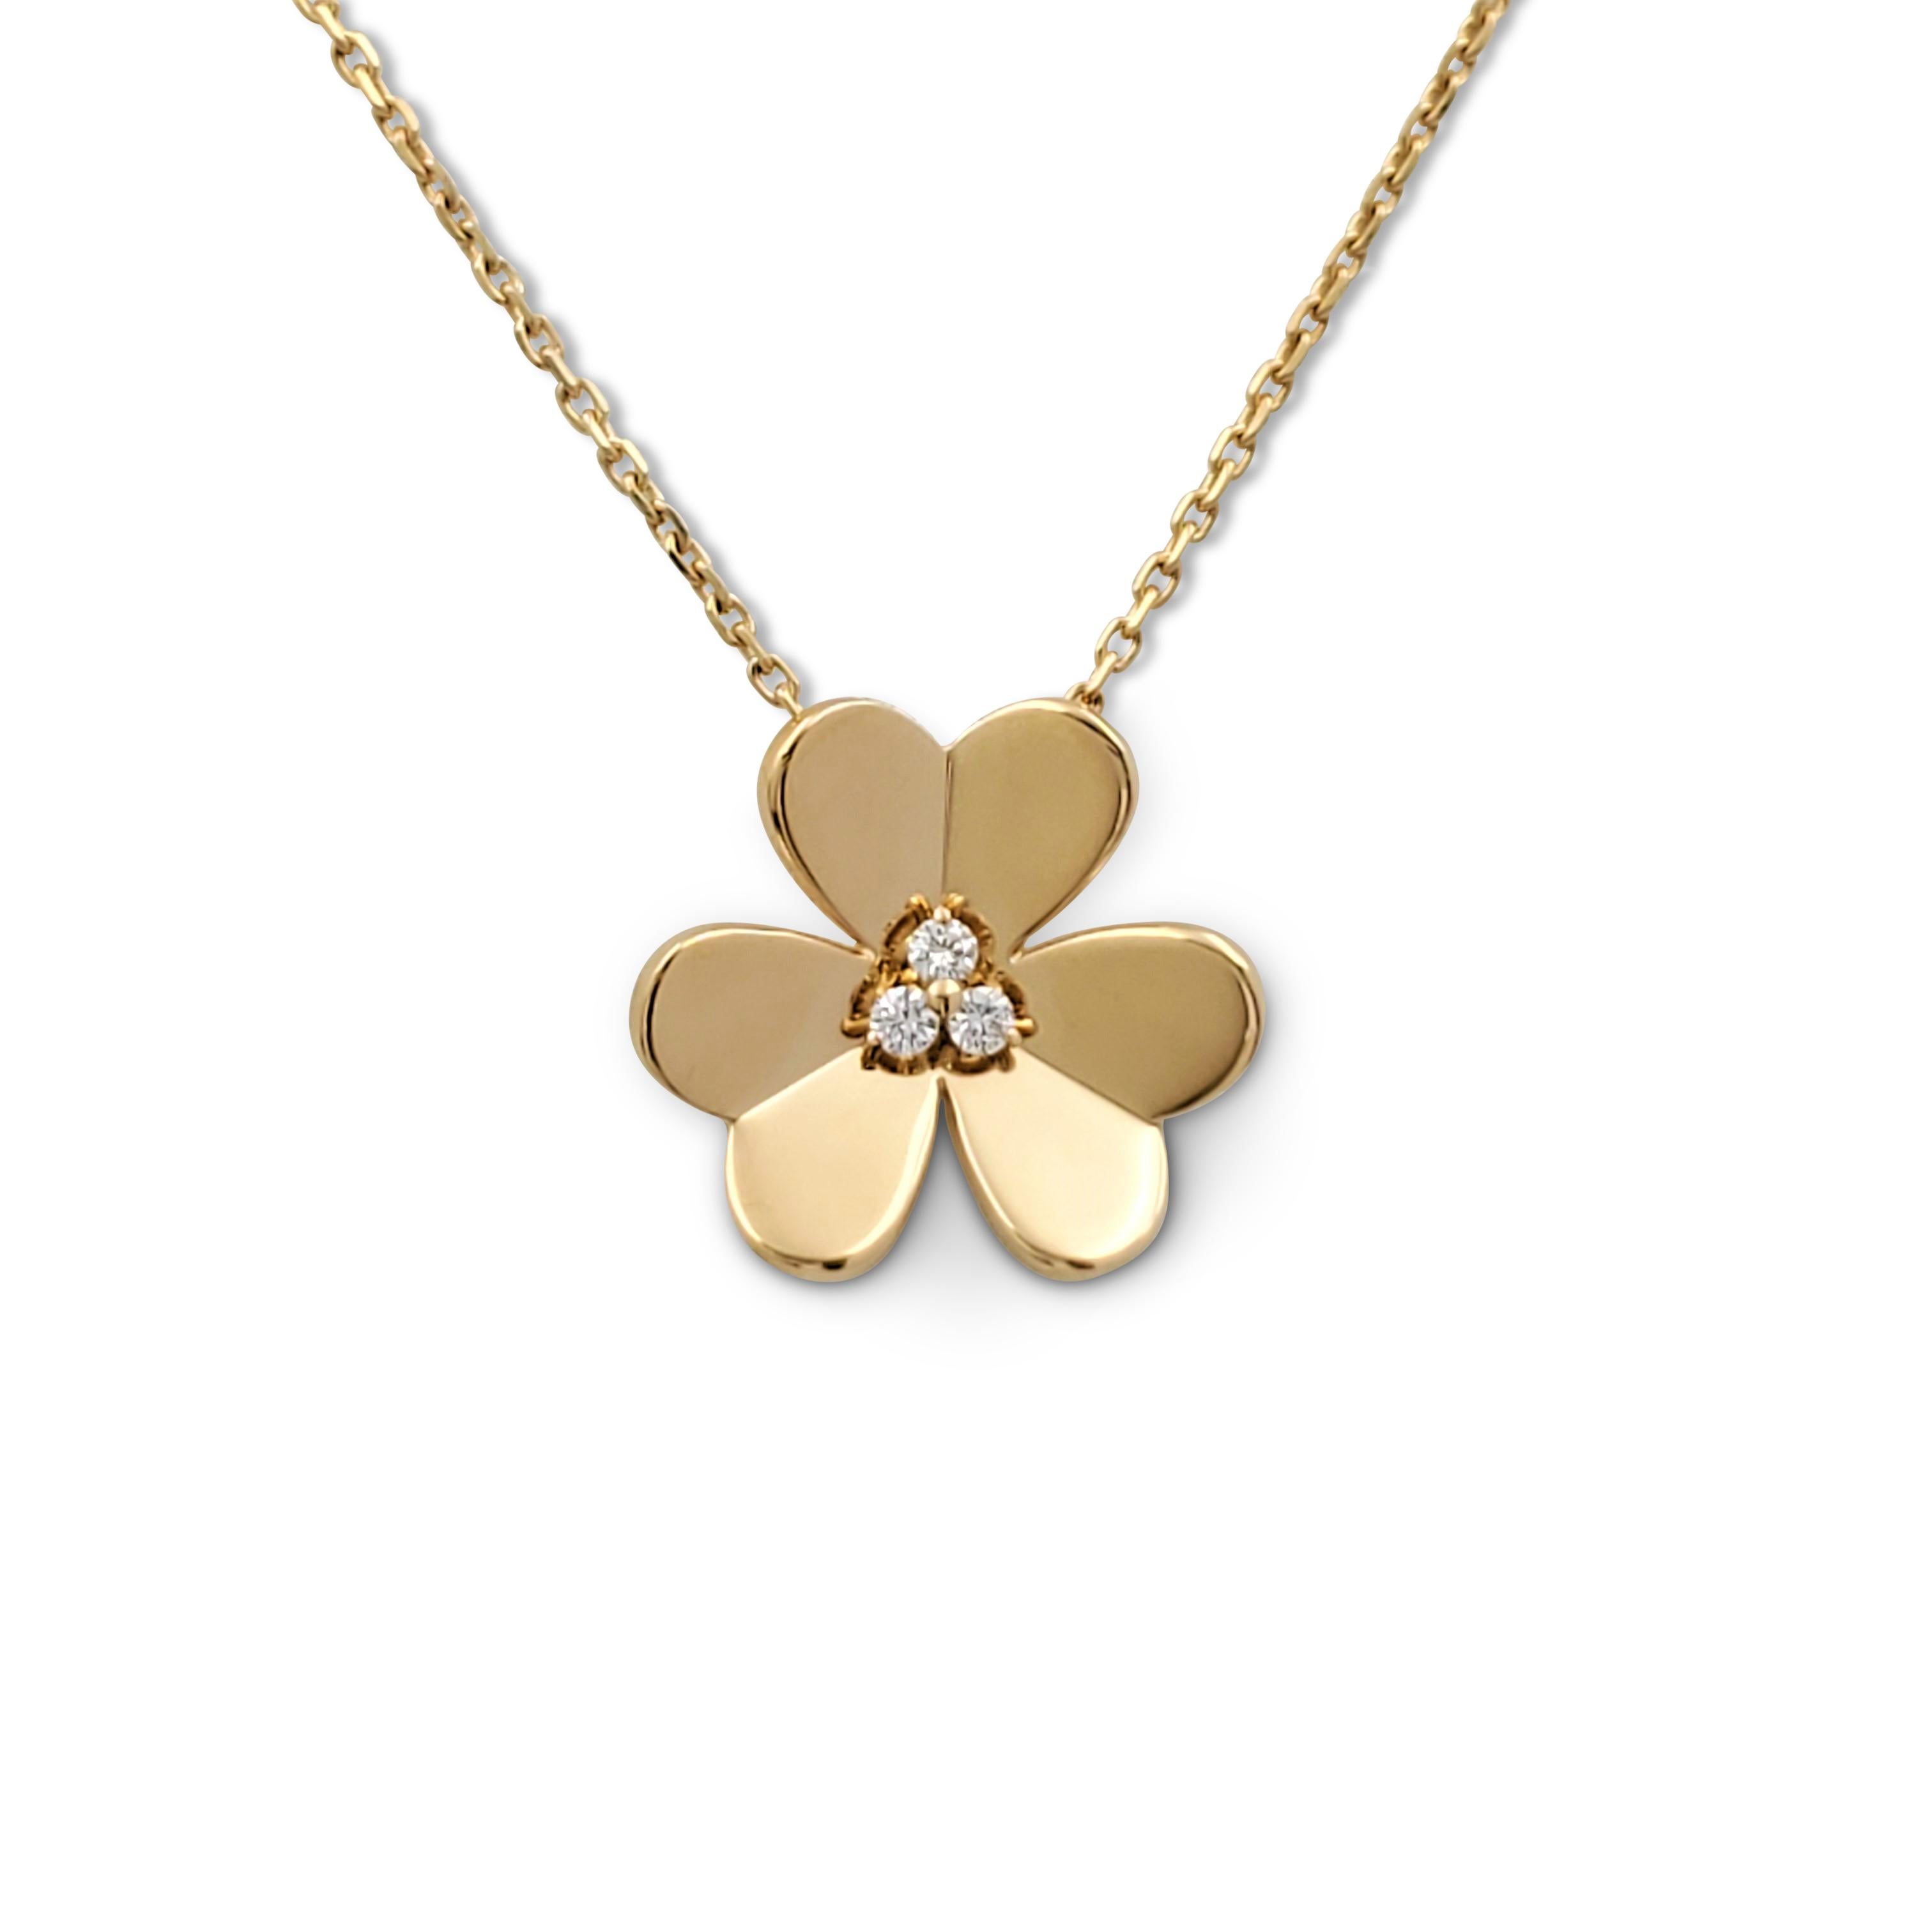 Authentic Van Cleef & Arpels 'Frivole' pendant necklace crafted in mirror-polished 18 karat yellow gold and set with an estimated 0.16 carats of round brilliant cut diamonds (E-F, VS) at the center. Signed VCA, 750, with serial number. The